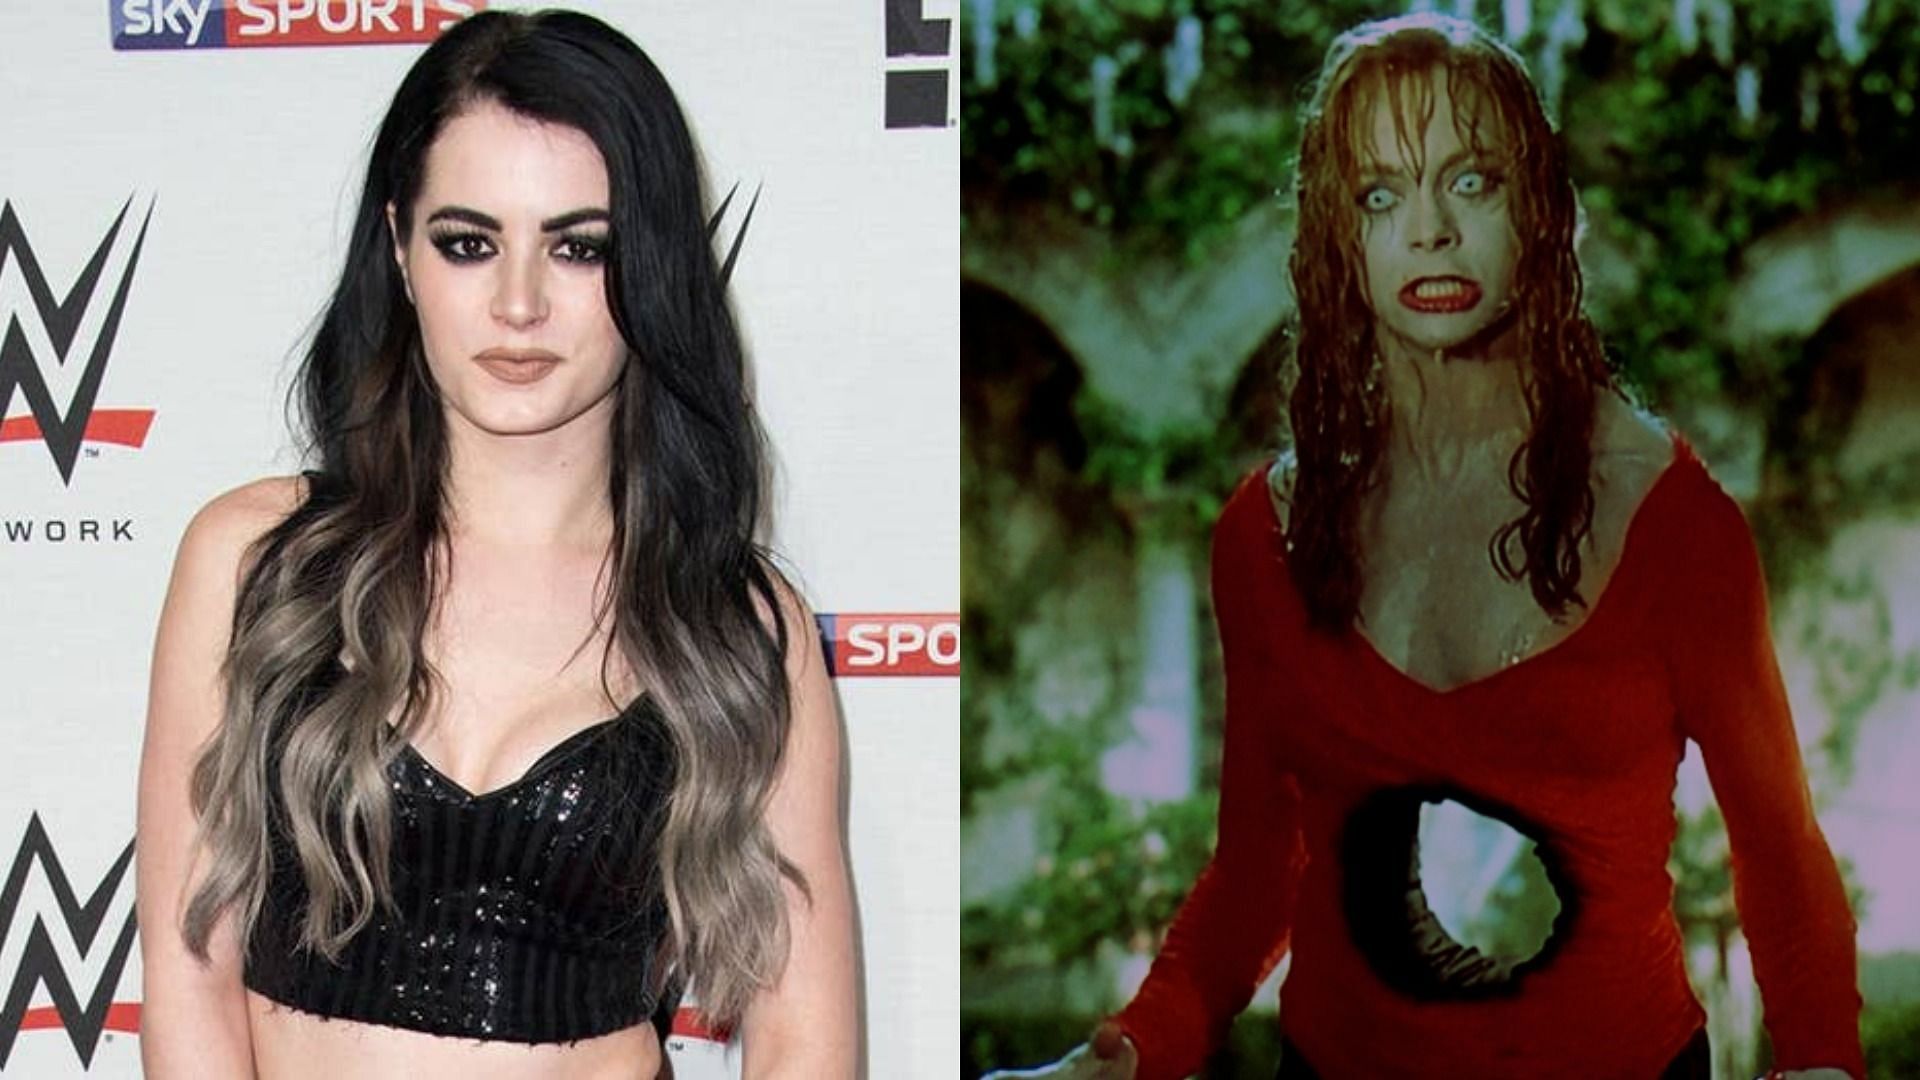 Fans are in awe looking at this incredible cosplay from Paige